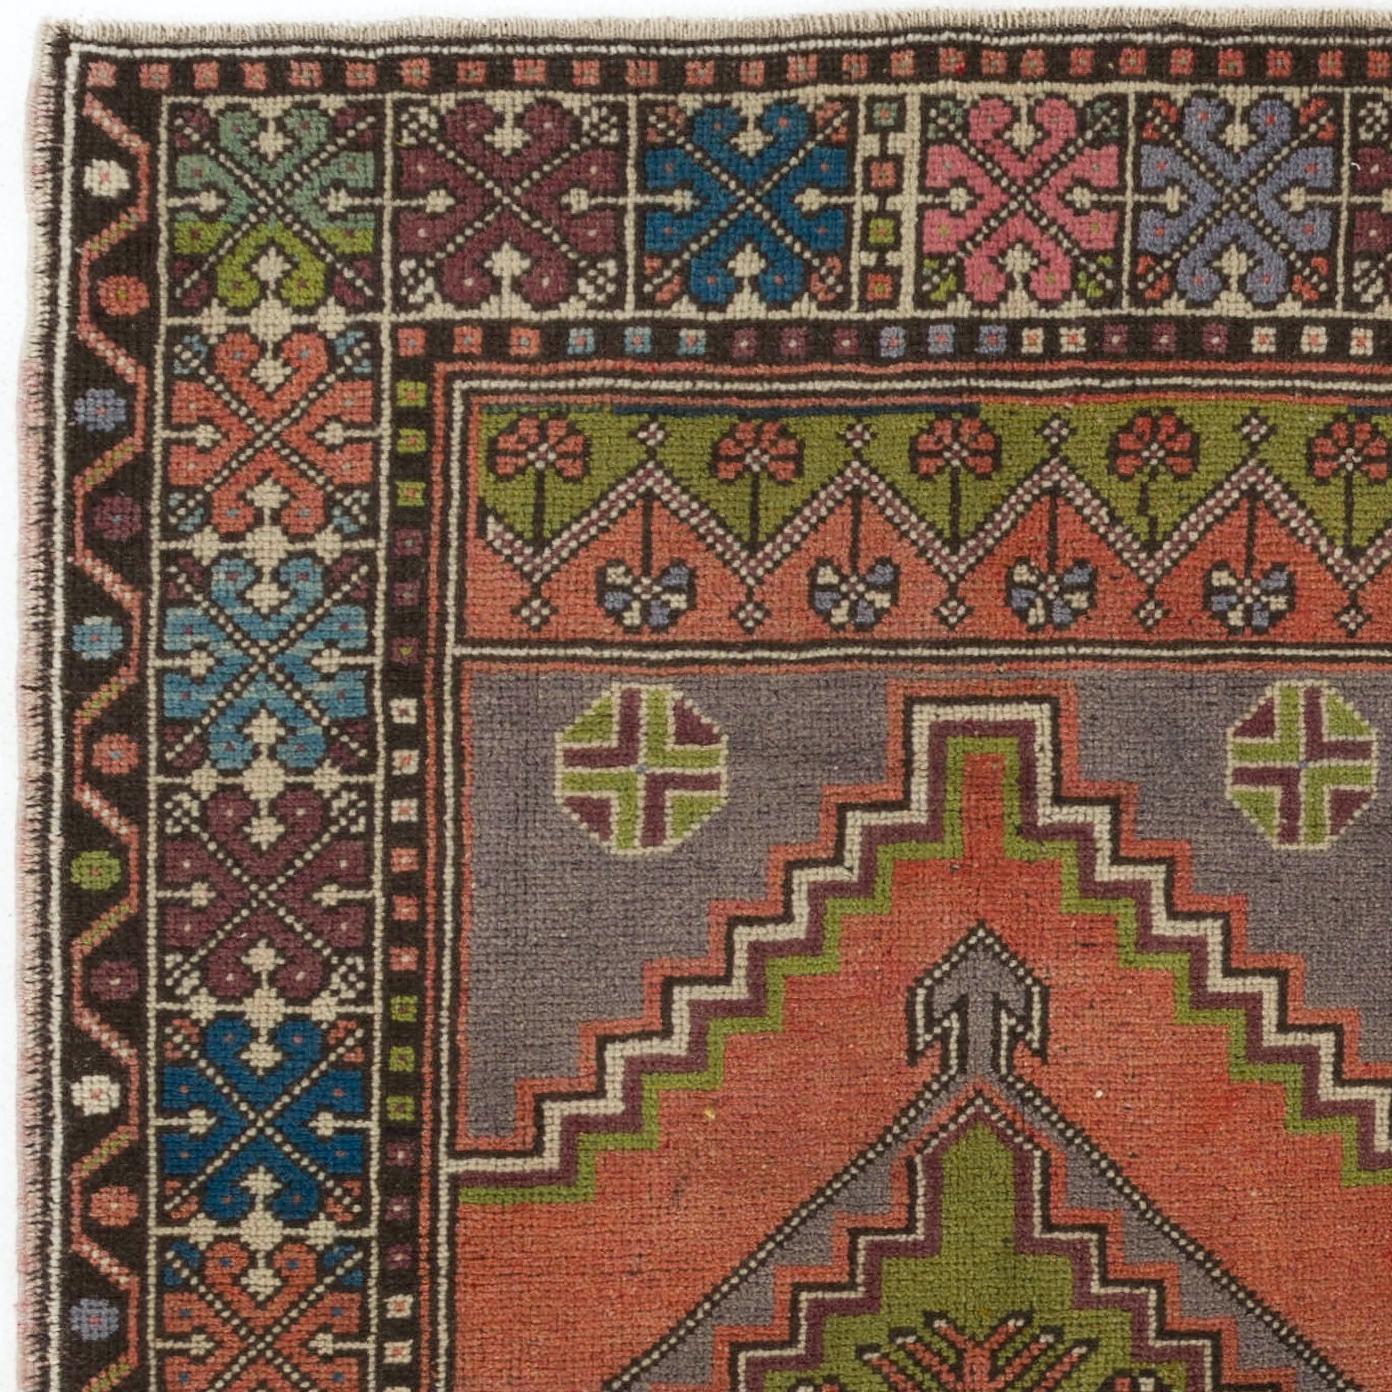 A finely hand-knotted vintage Turkish carpet from 1950s featuring a well-drawn geometric design with a medallion at its center. The rug is made of medium wool pile on wool foundation. It is heavy and lays flat on the floor, in very good condition